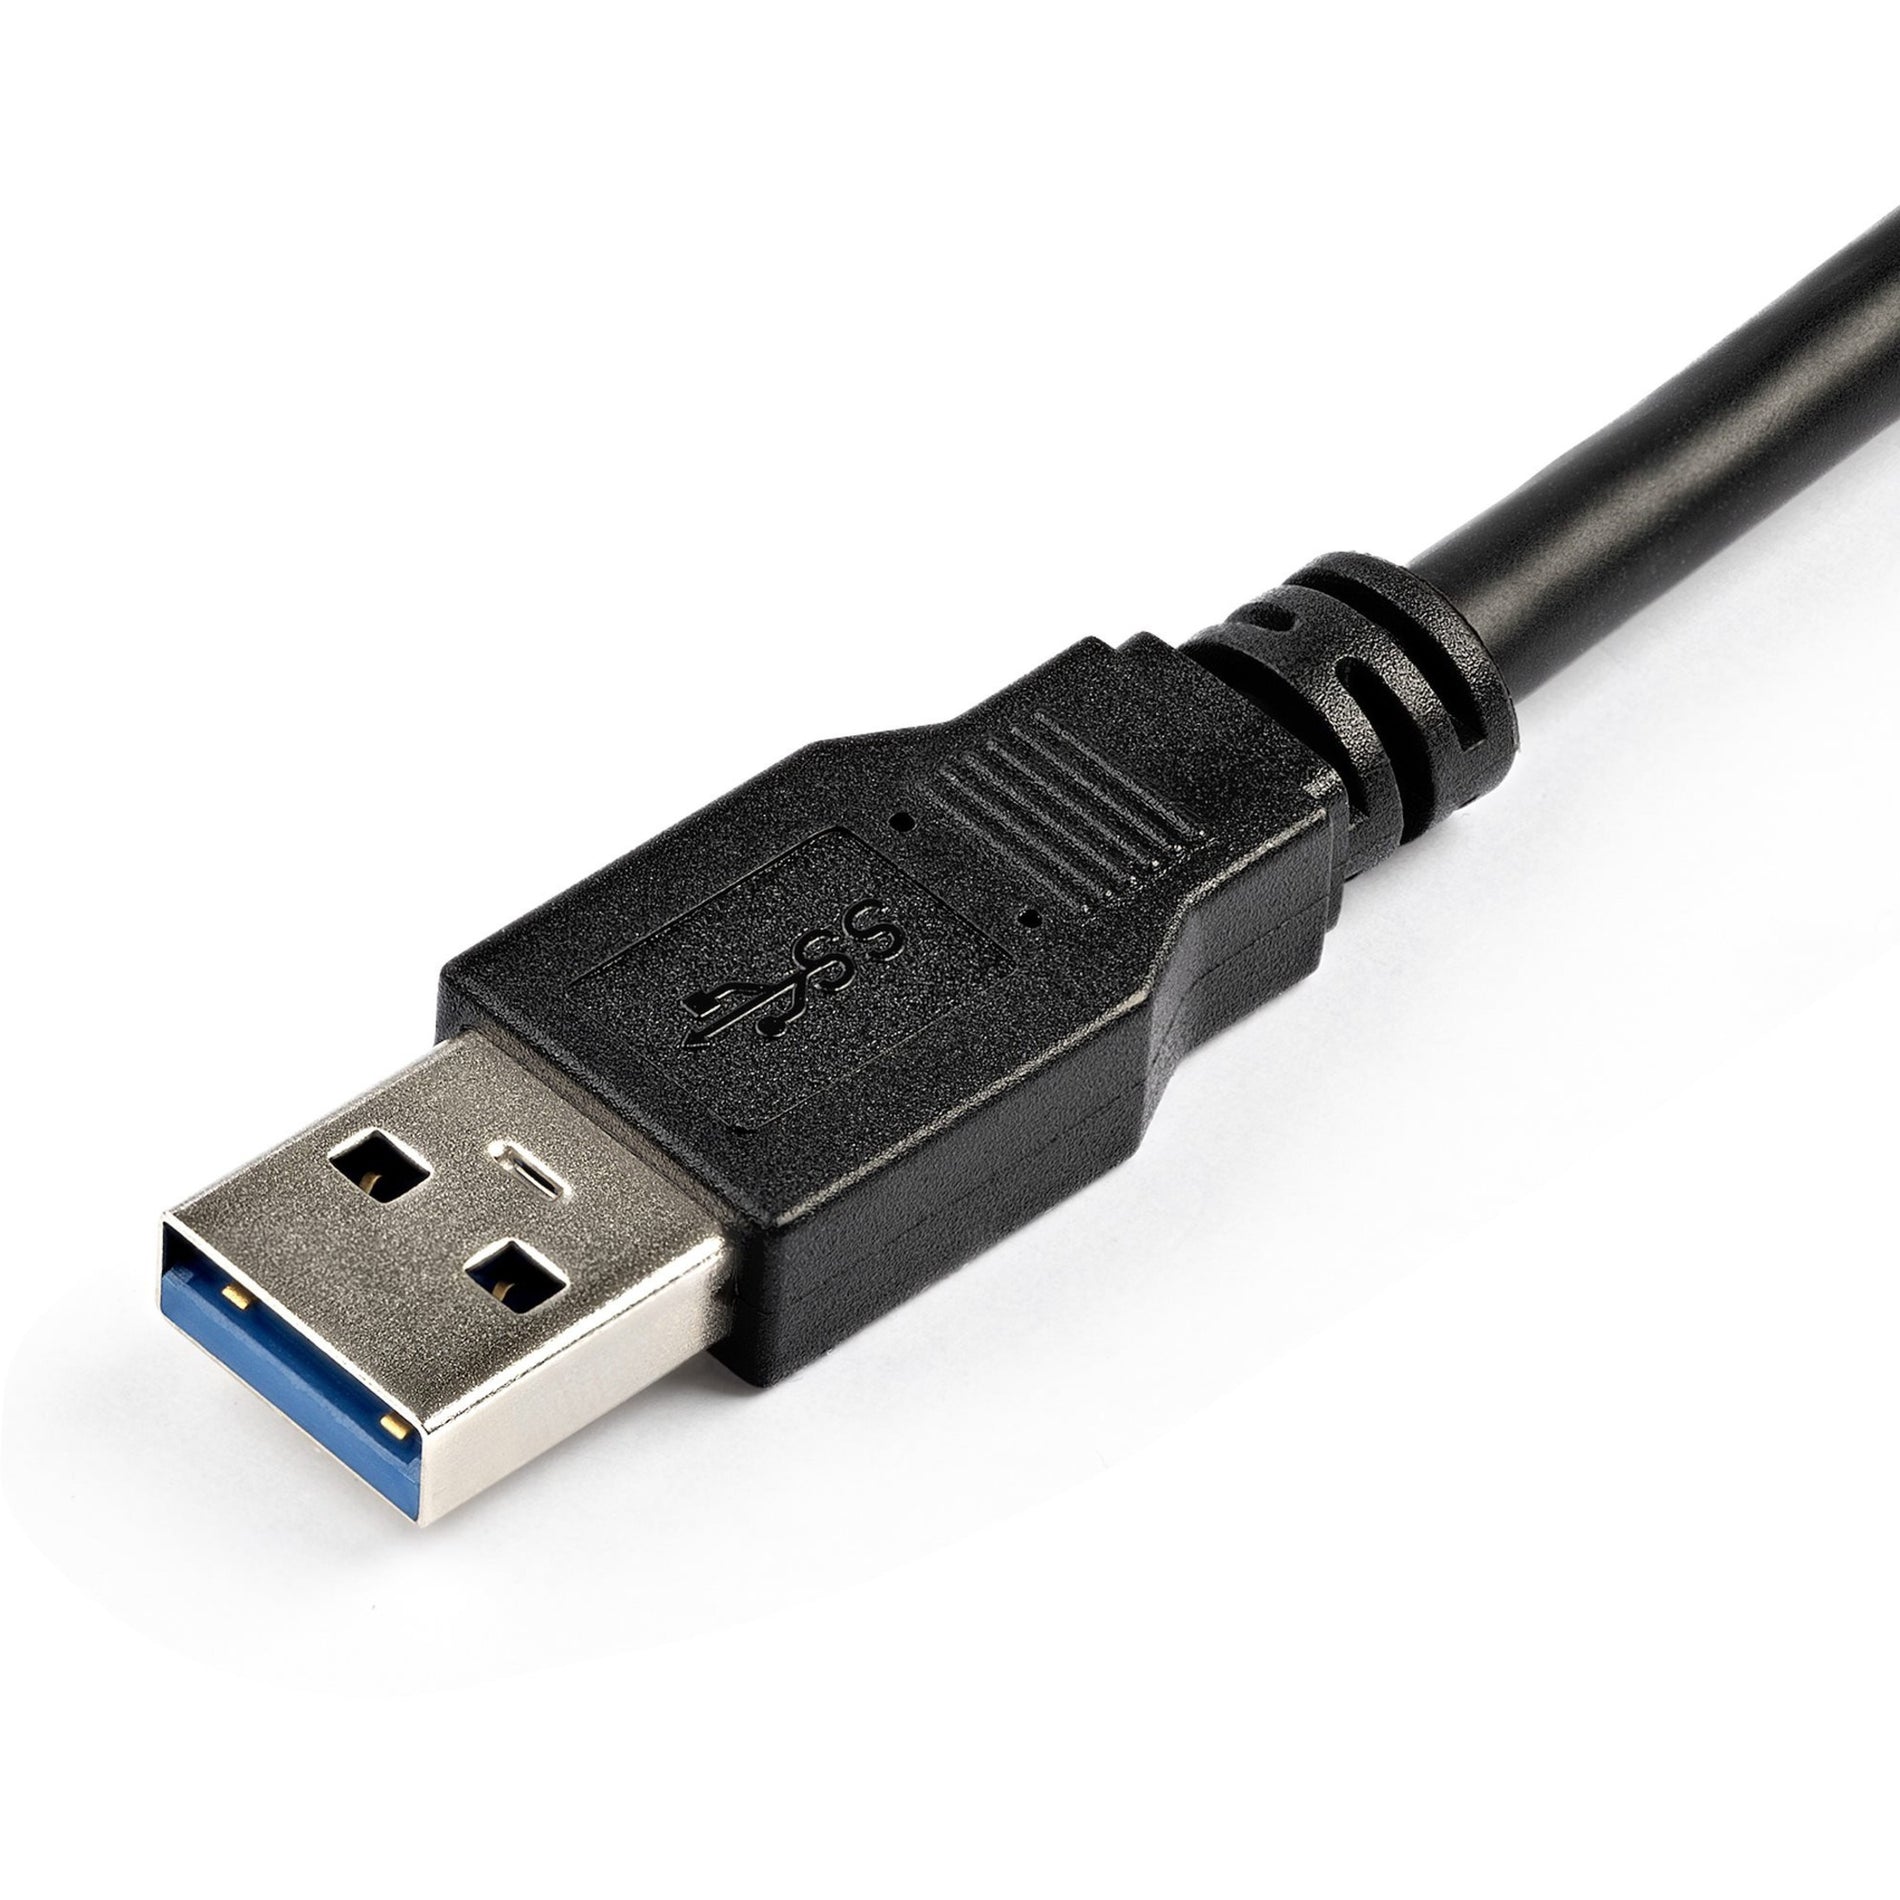 StarTech.com USB3SEXT2MBK 2m Black SuperSpeed USB 3.0 Extension Cable A to A - M/F, EMI Protection, 5 Gbit/s Data Transfer Rate